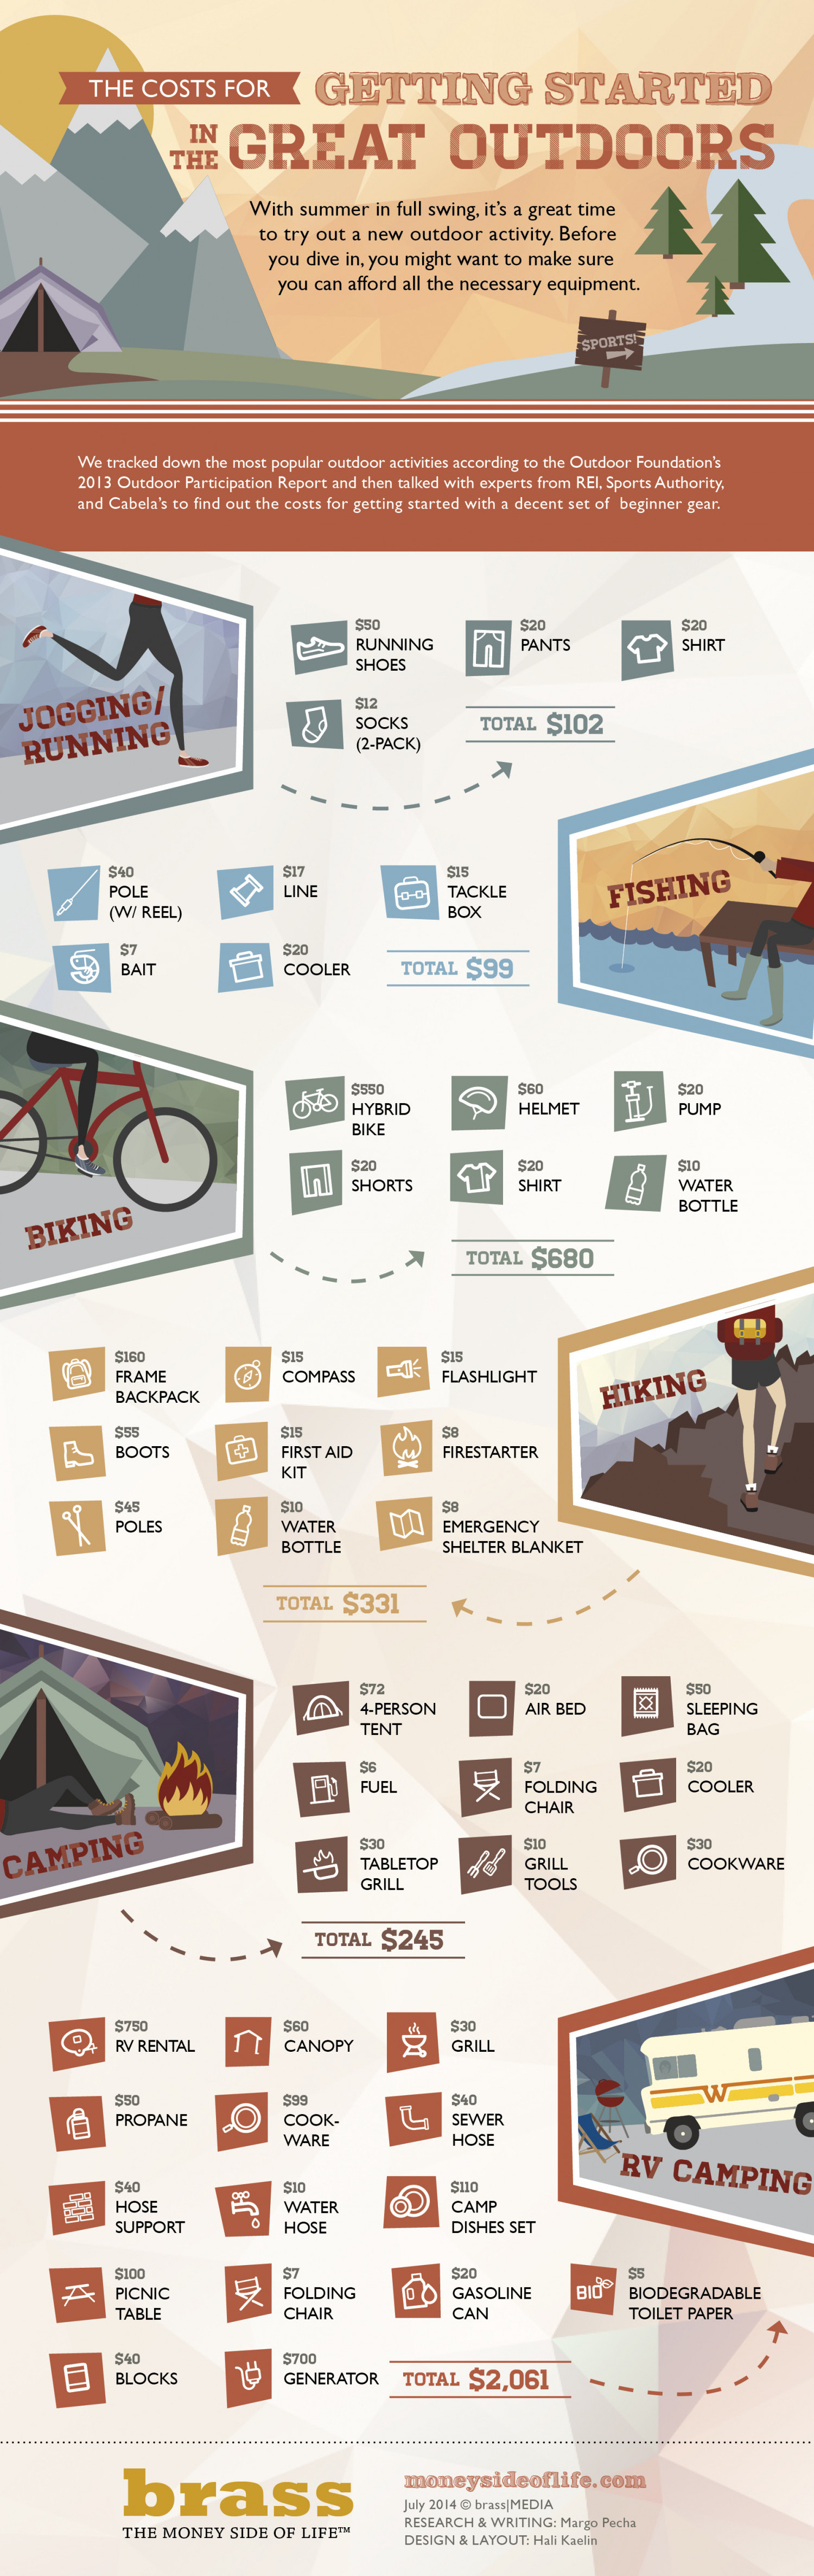 The Costs for Getting Started in the Great Outdoors Infographic